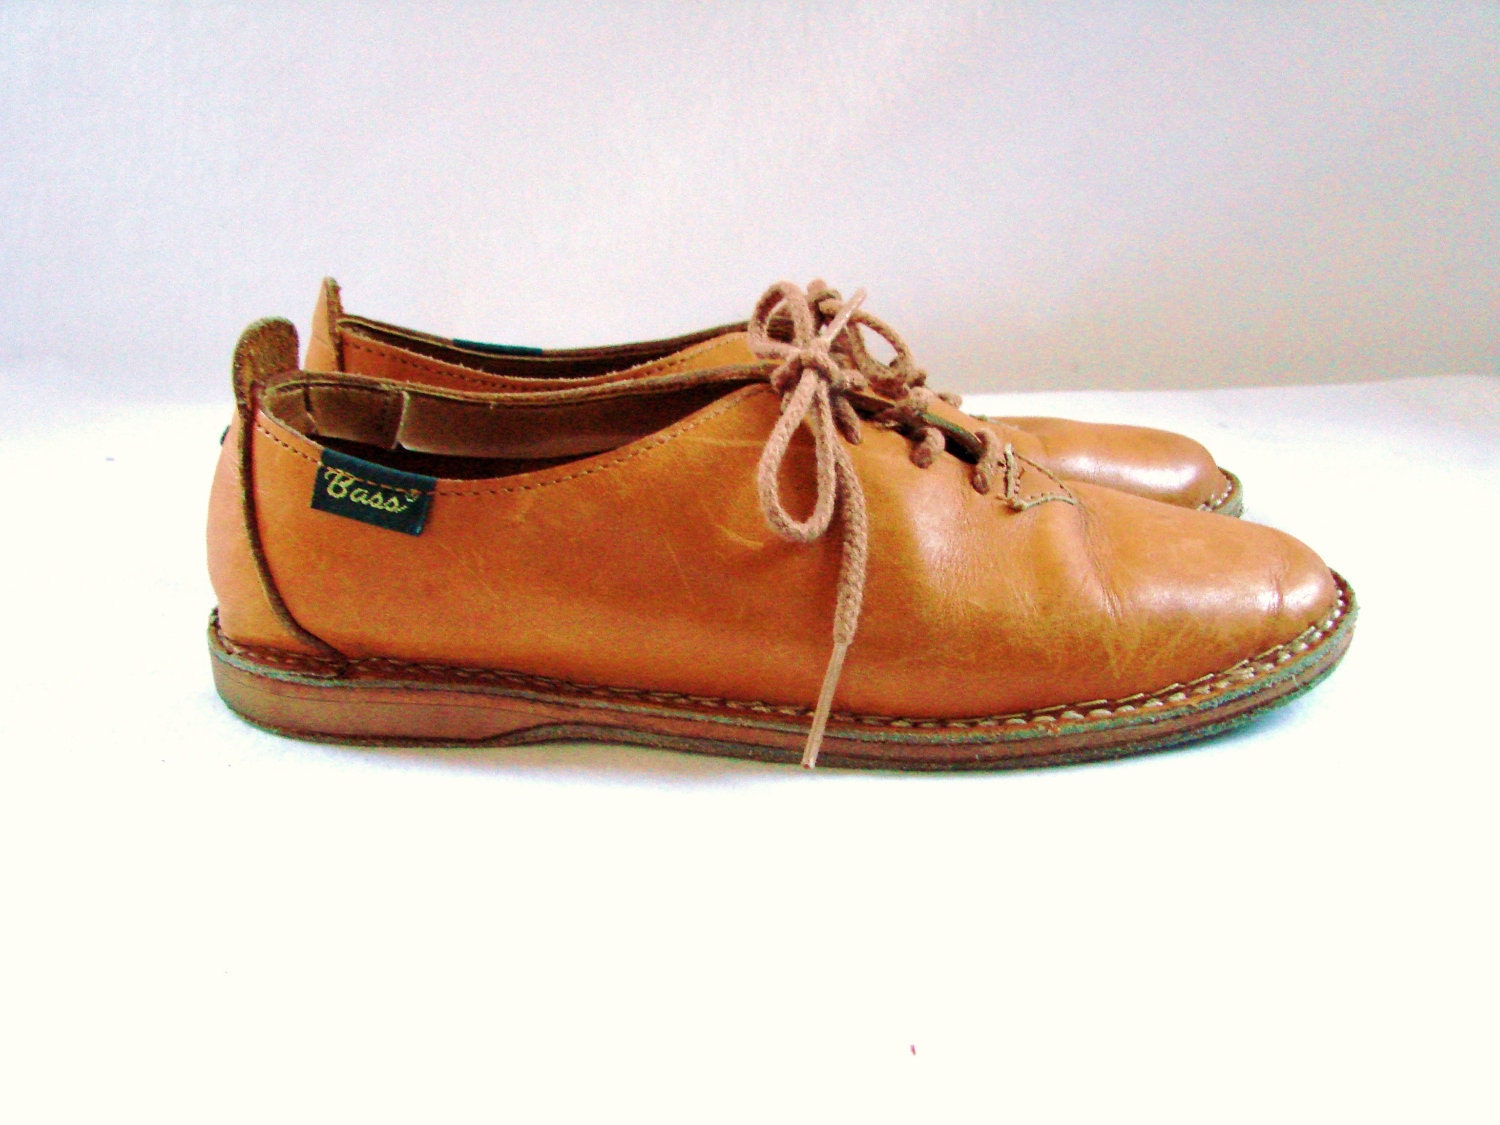 RESERVED Bass Shoes / Vintage Honey Tan Leather by CasitaDeLita